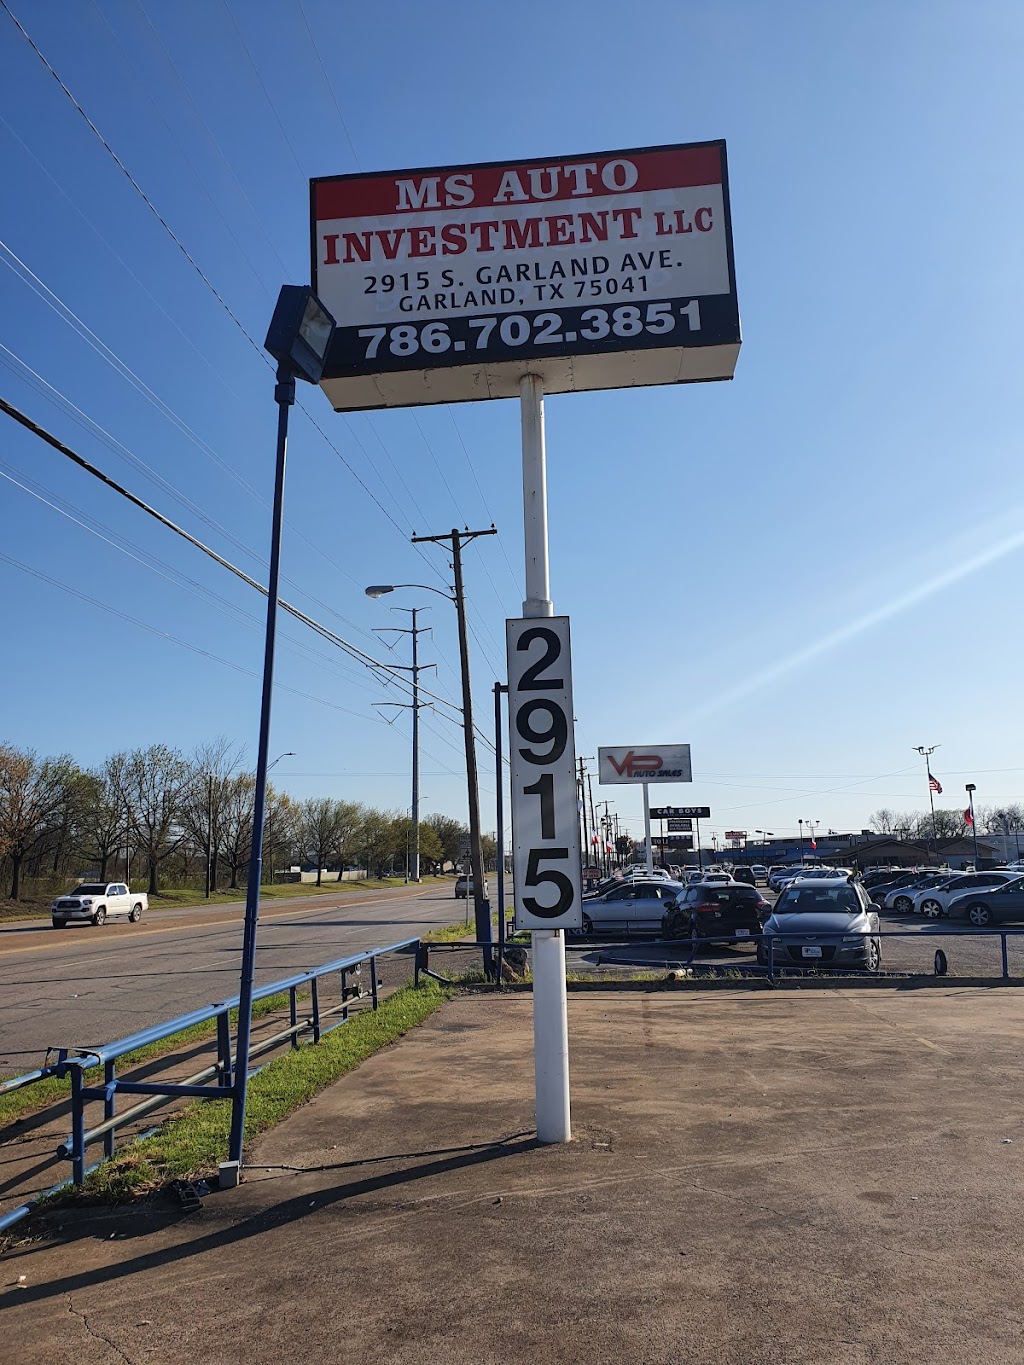 MS AUTO INVESTMENT | 2915 S Garland Ave SUITE A, Garland, TX 75041, USA | Phone: (786) 702-3851